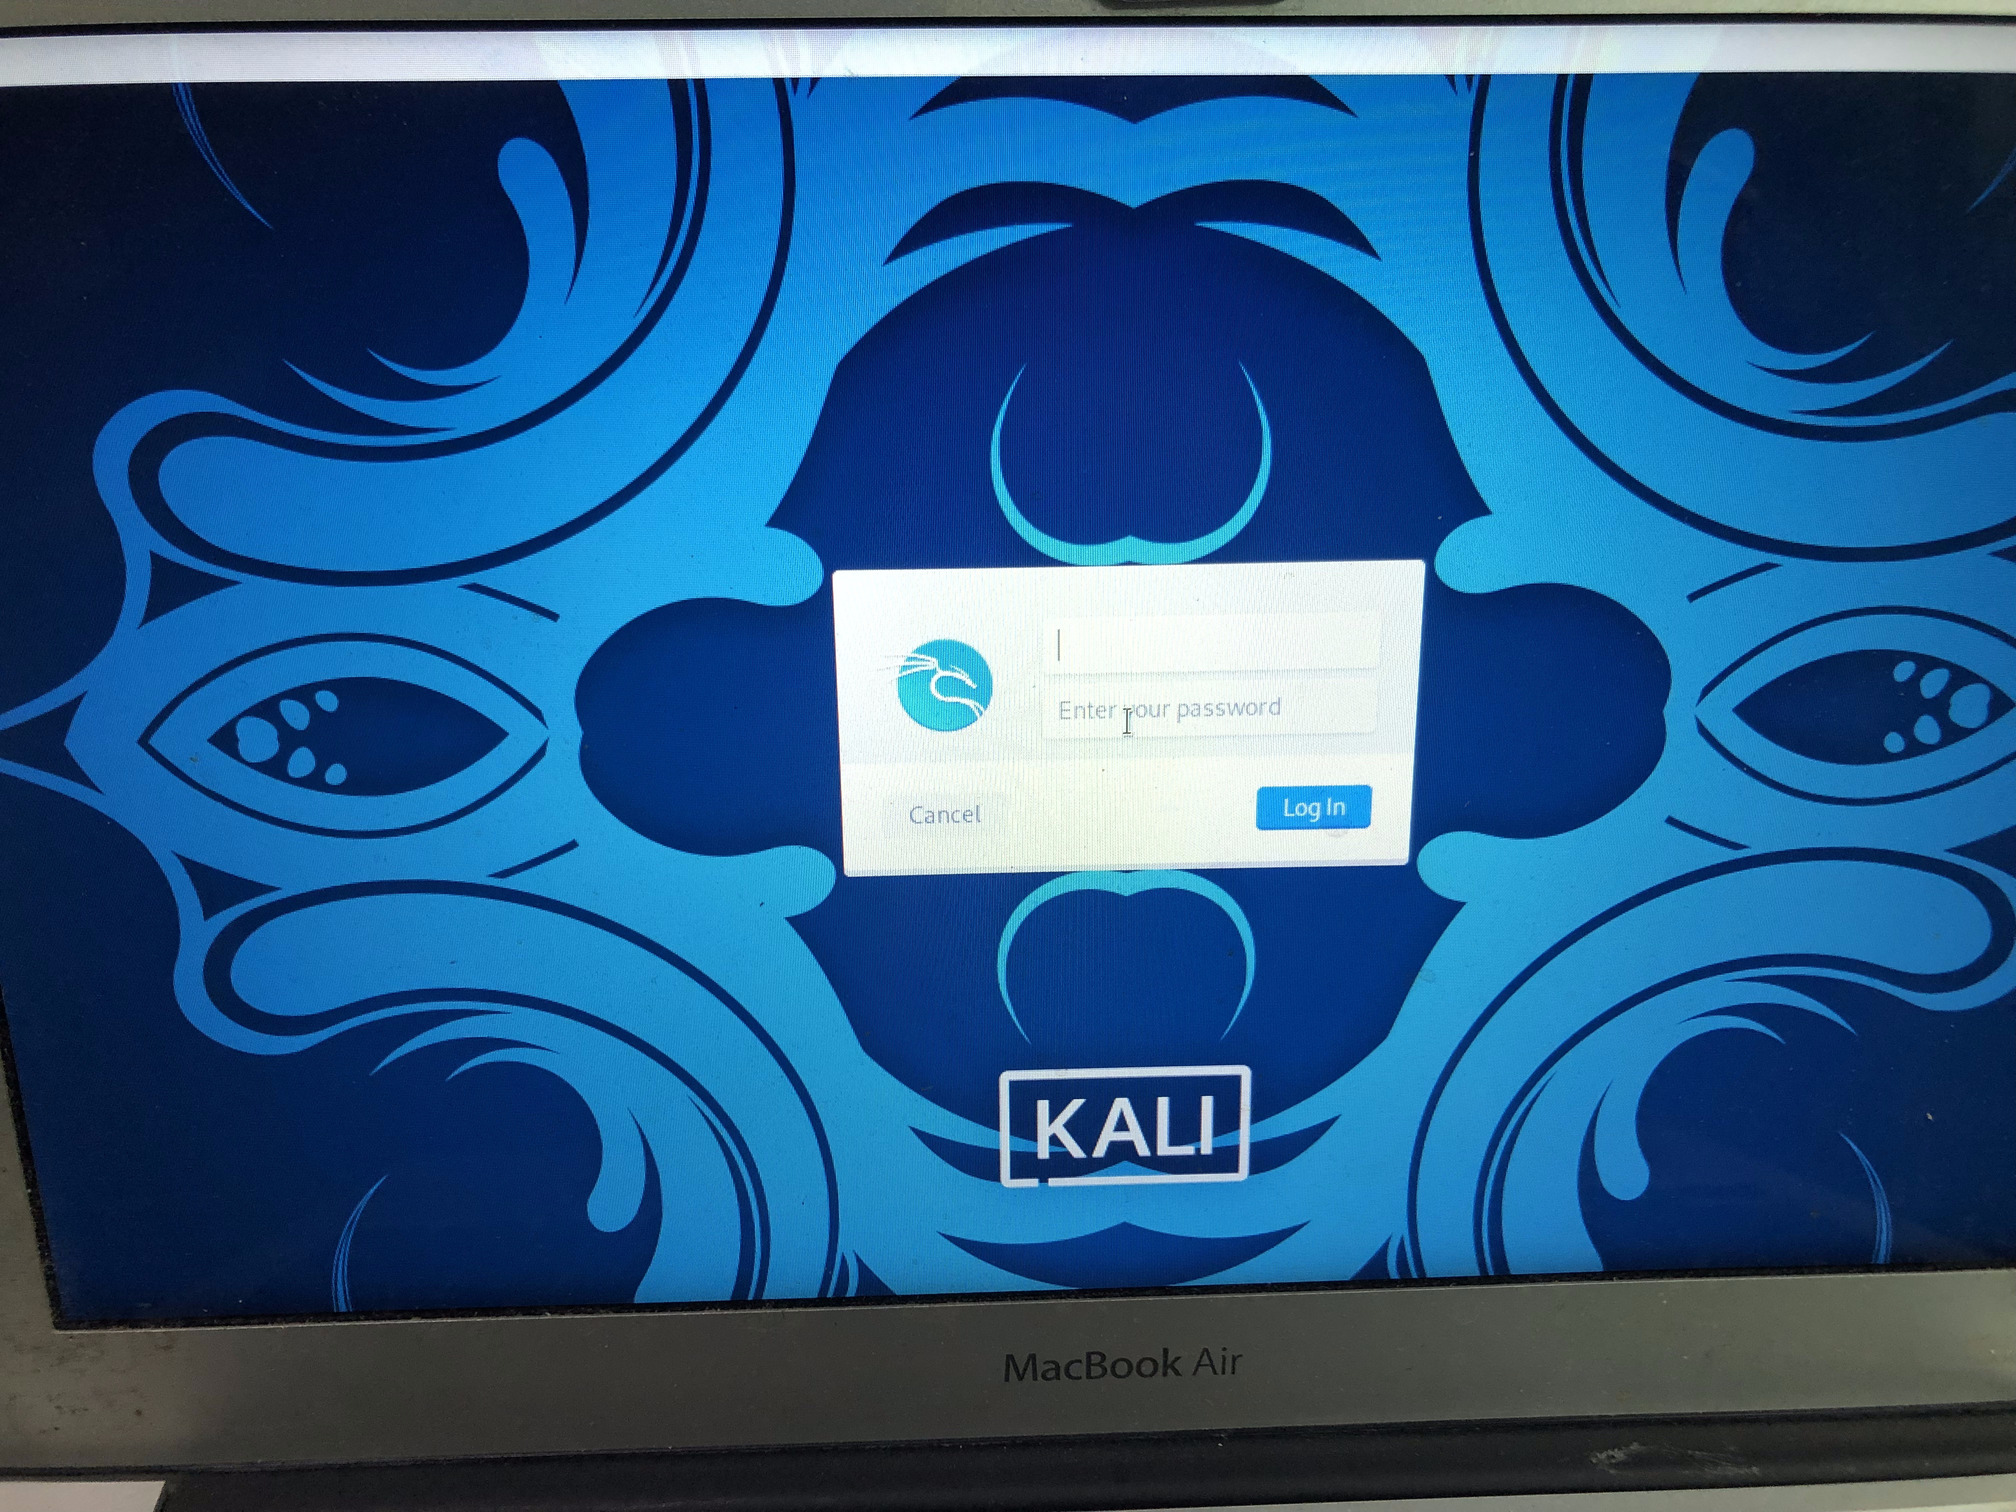 Figure 11. Kali Linux installed on the MacBook Air